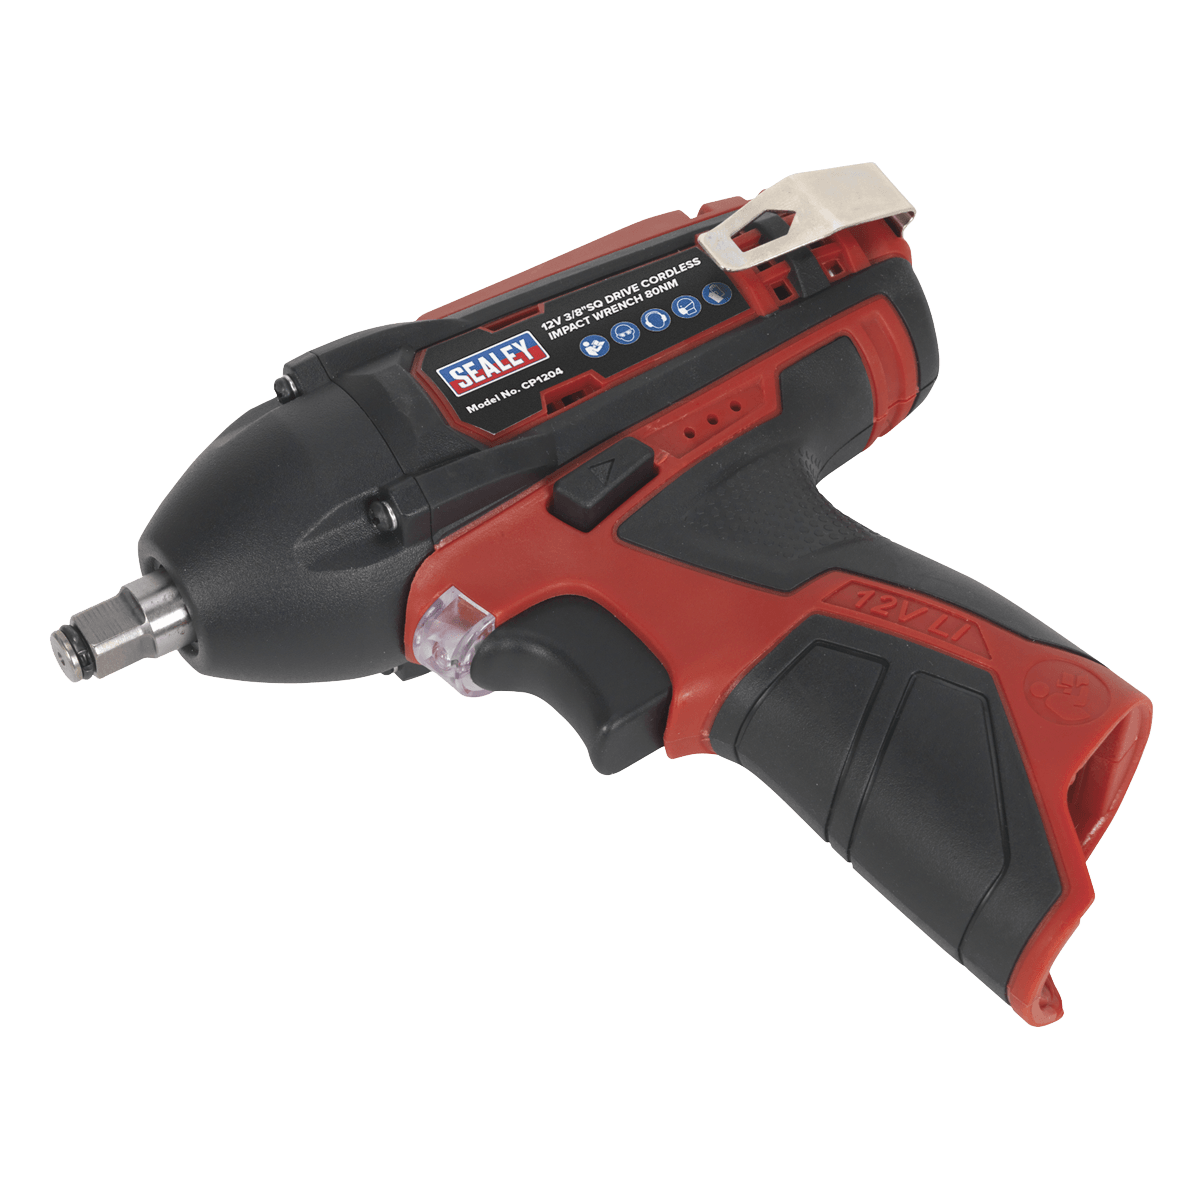 Sealey Cordless Impact Wrench 3/8"Sq Drive 12V SV12 Series - Body Only CP1204 - Tools 2U Direct SW